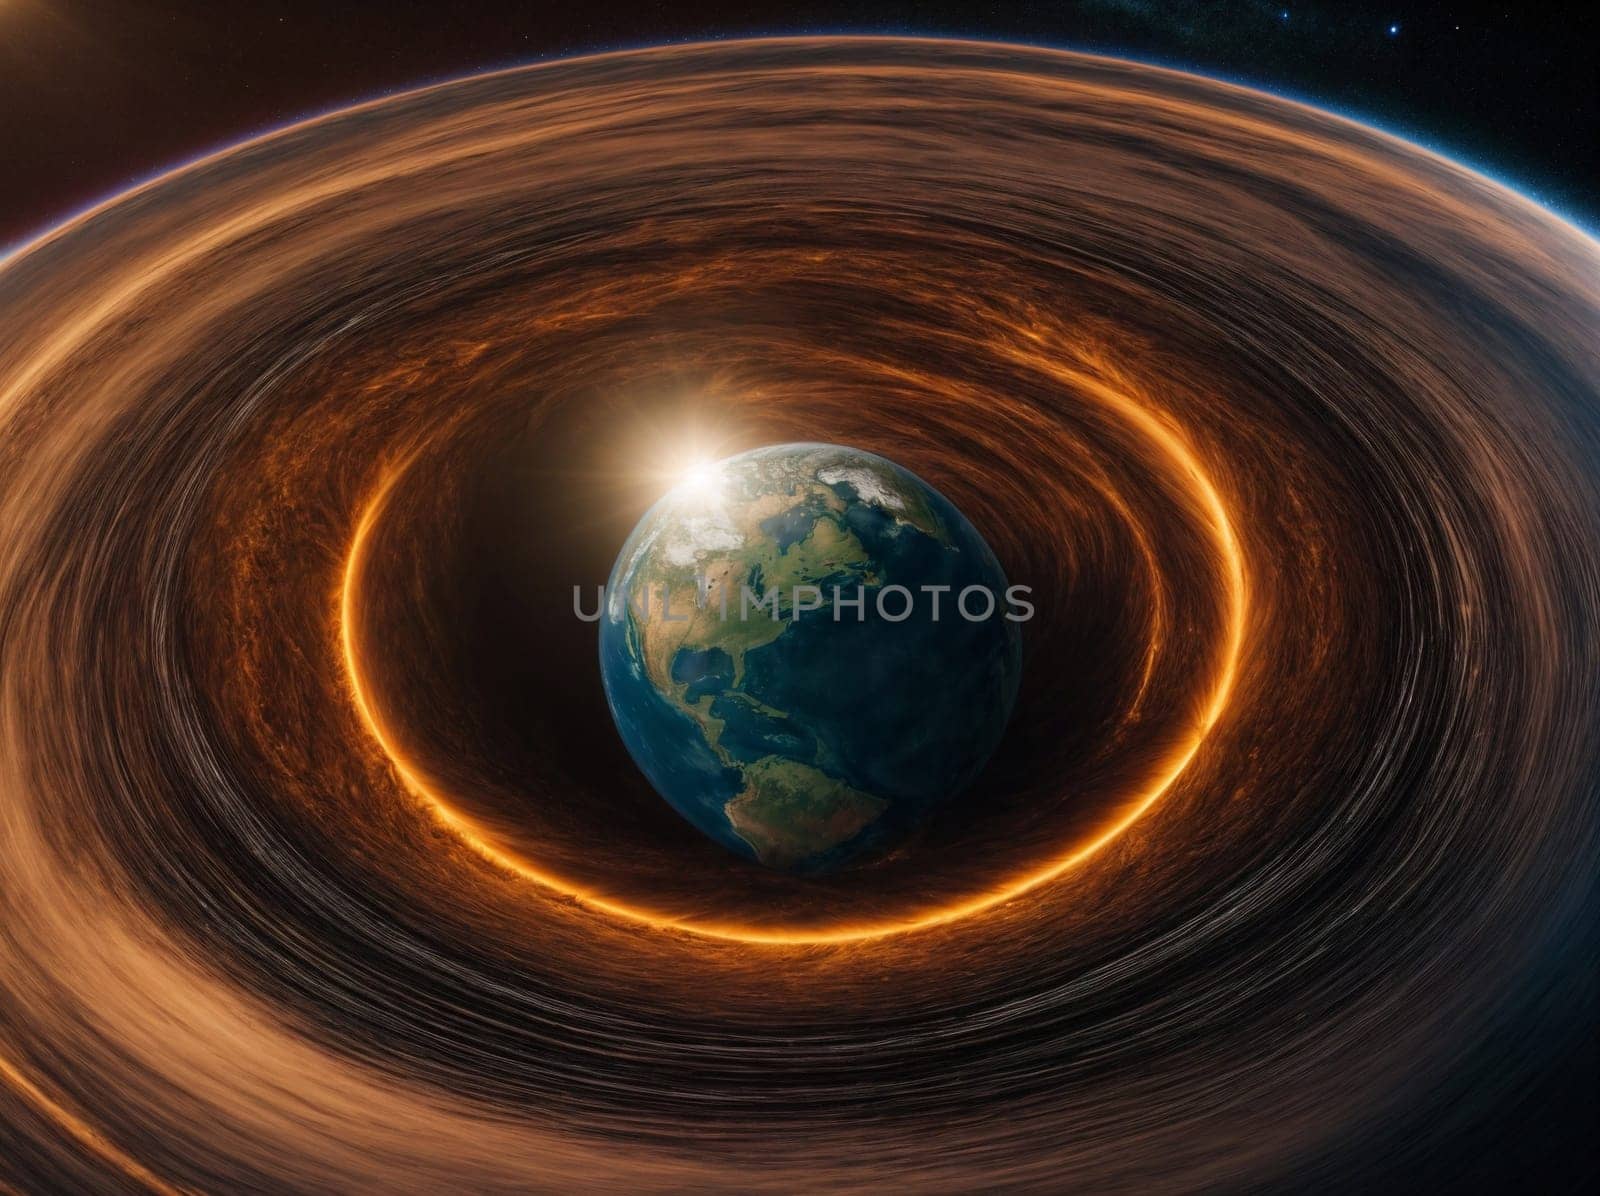 A digital painting depicting a black hole in space, surrounded by a swirling disk of accreting matter.